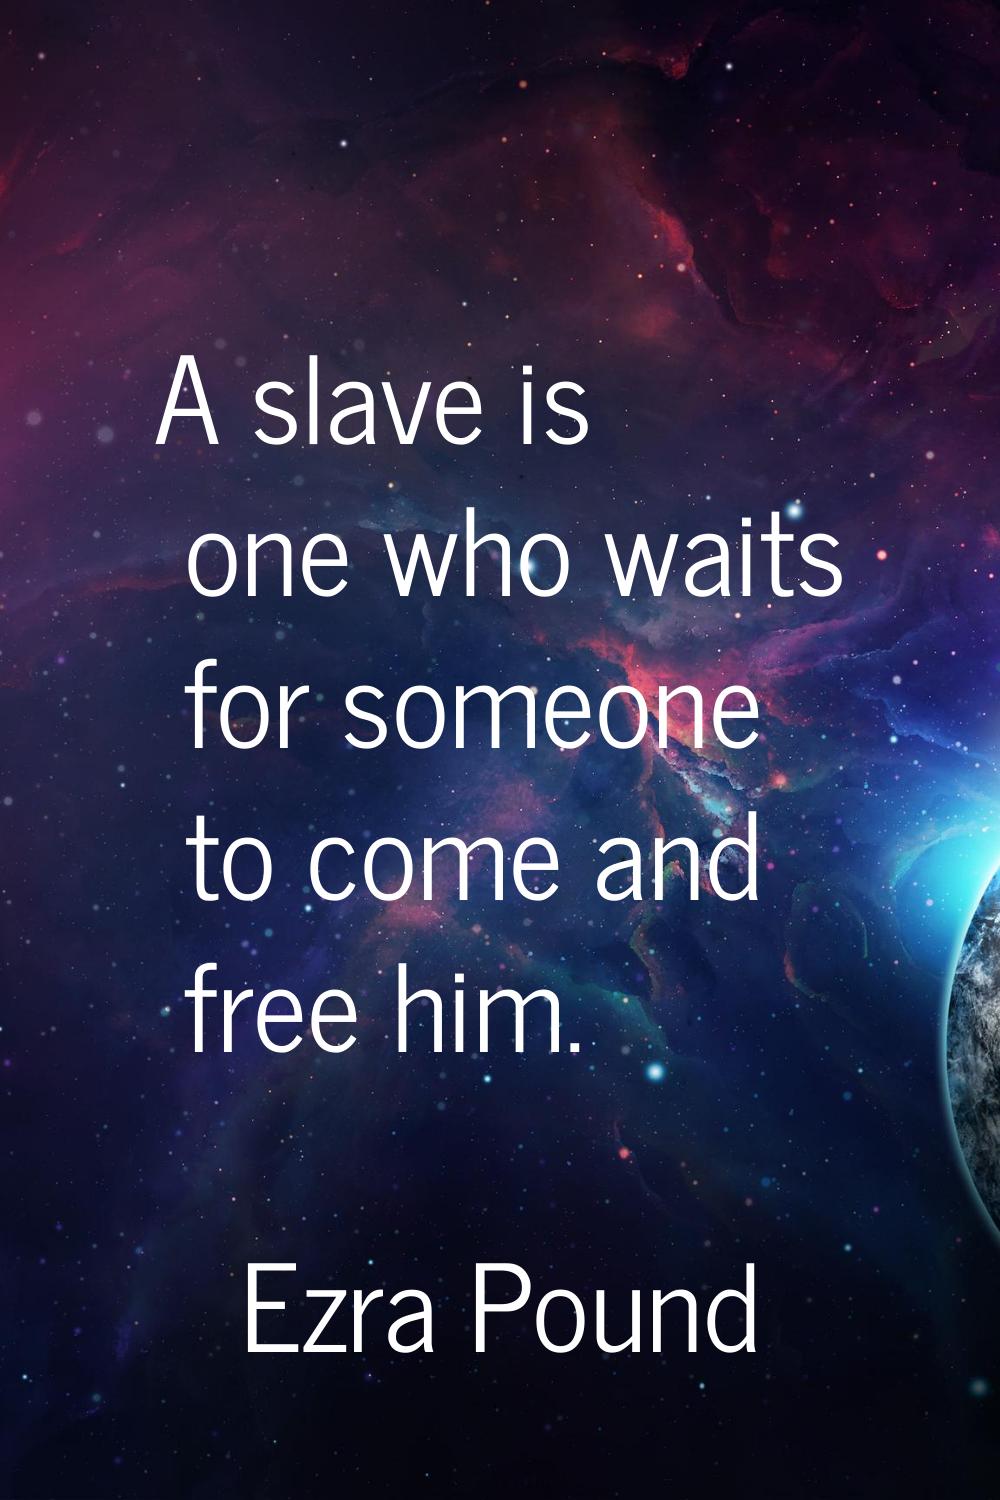 A slave is one who waits for someone to come and free him.